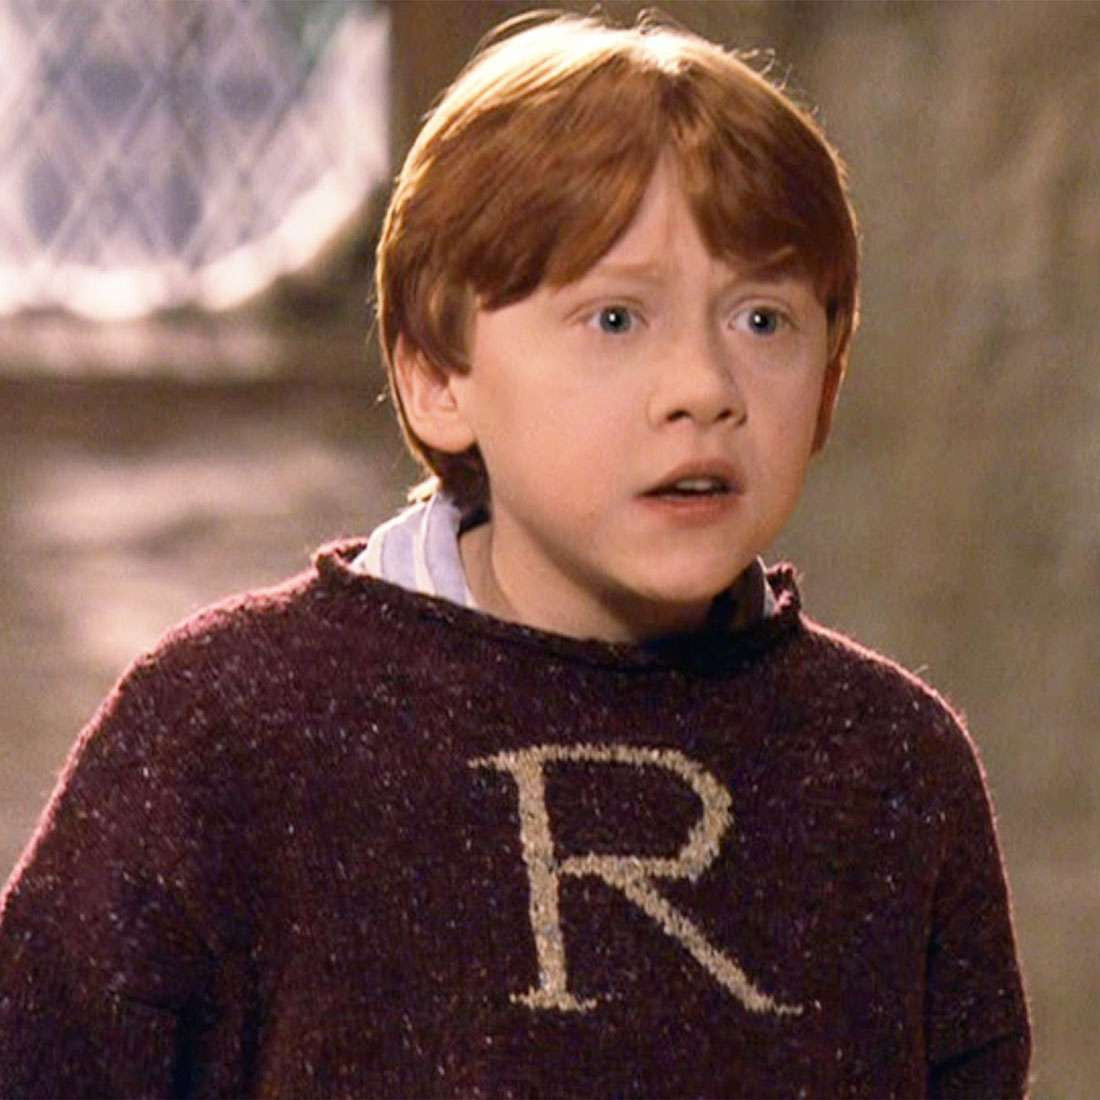 Pull-over Harry Potter - UGLY RON WEASLEY